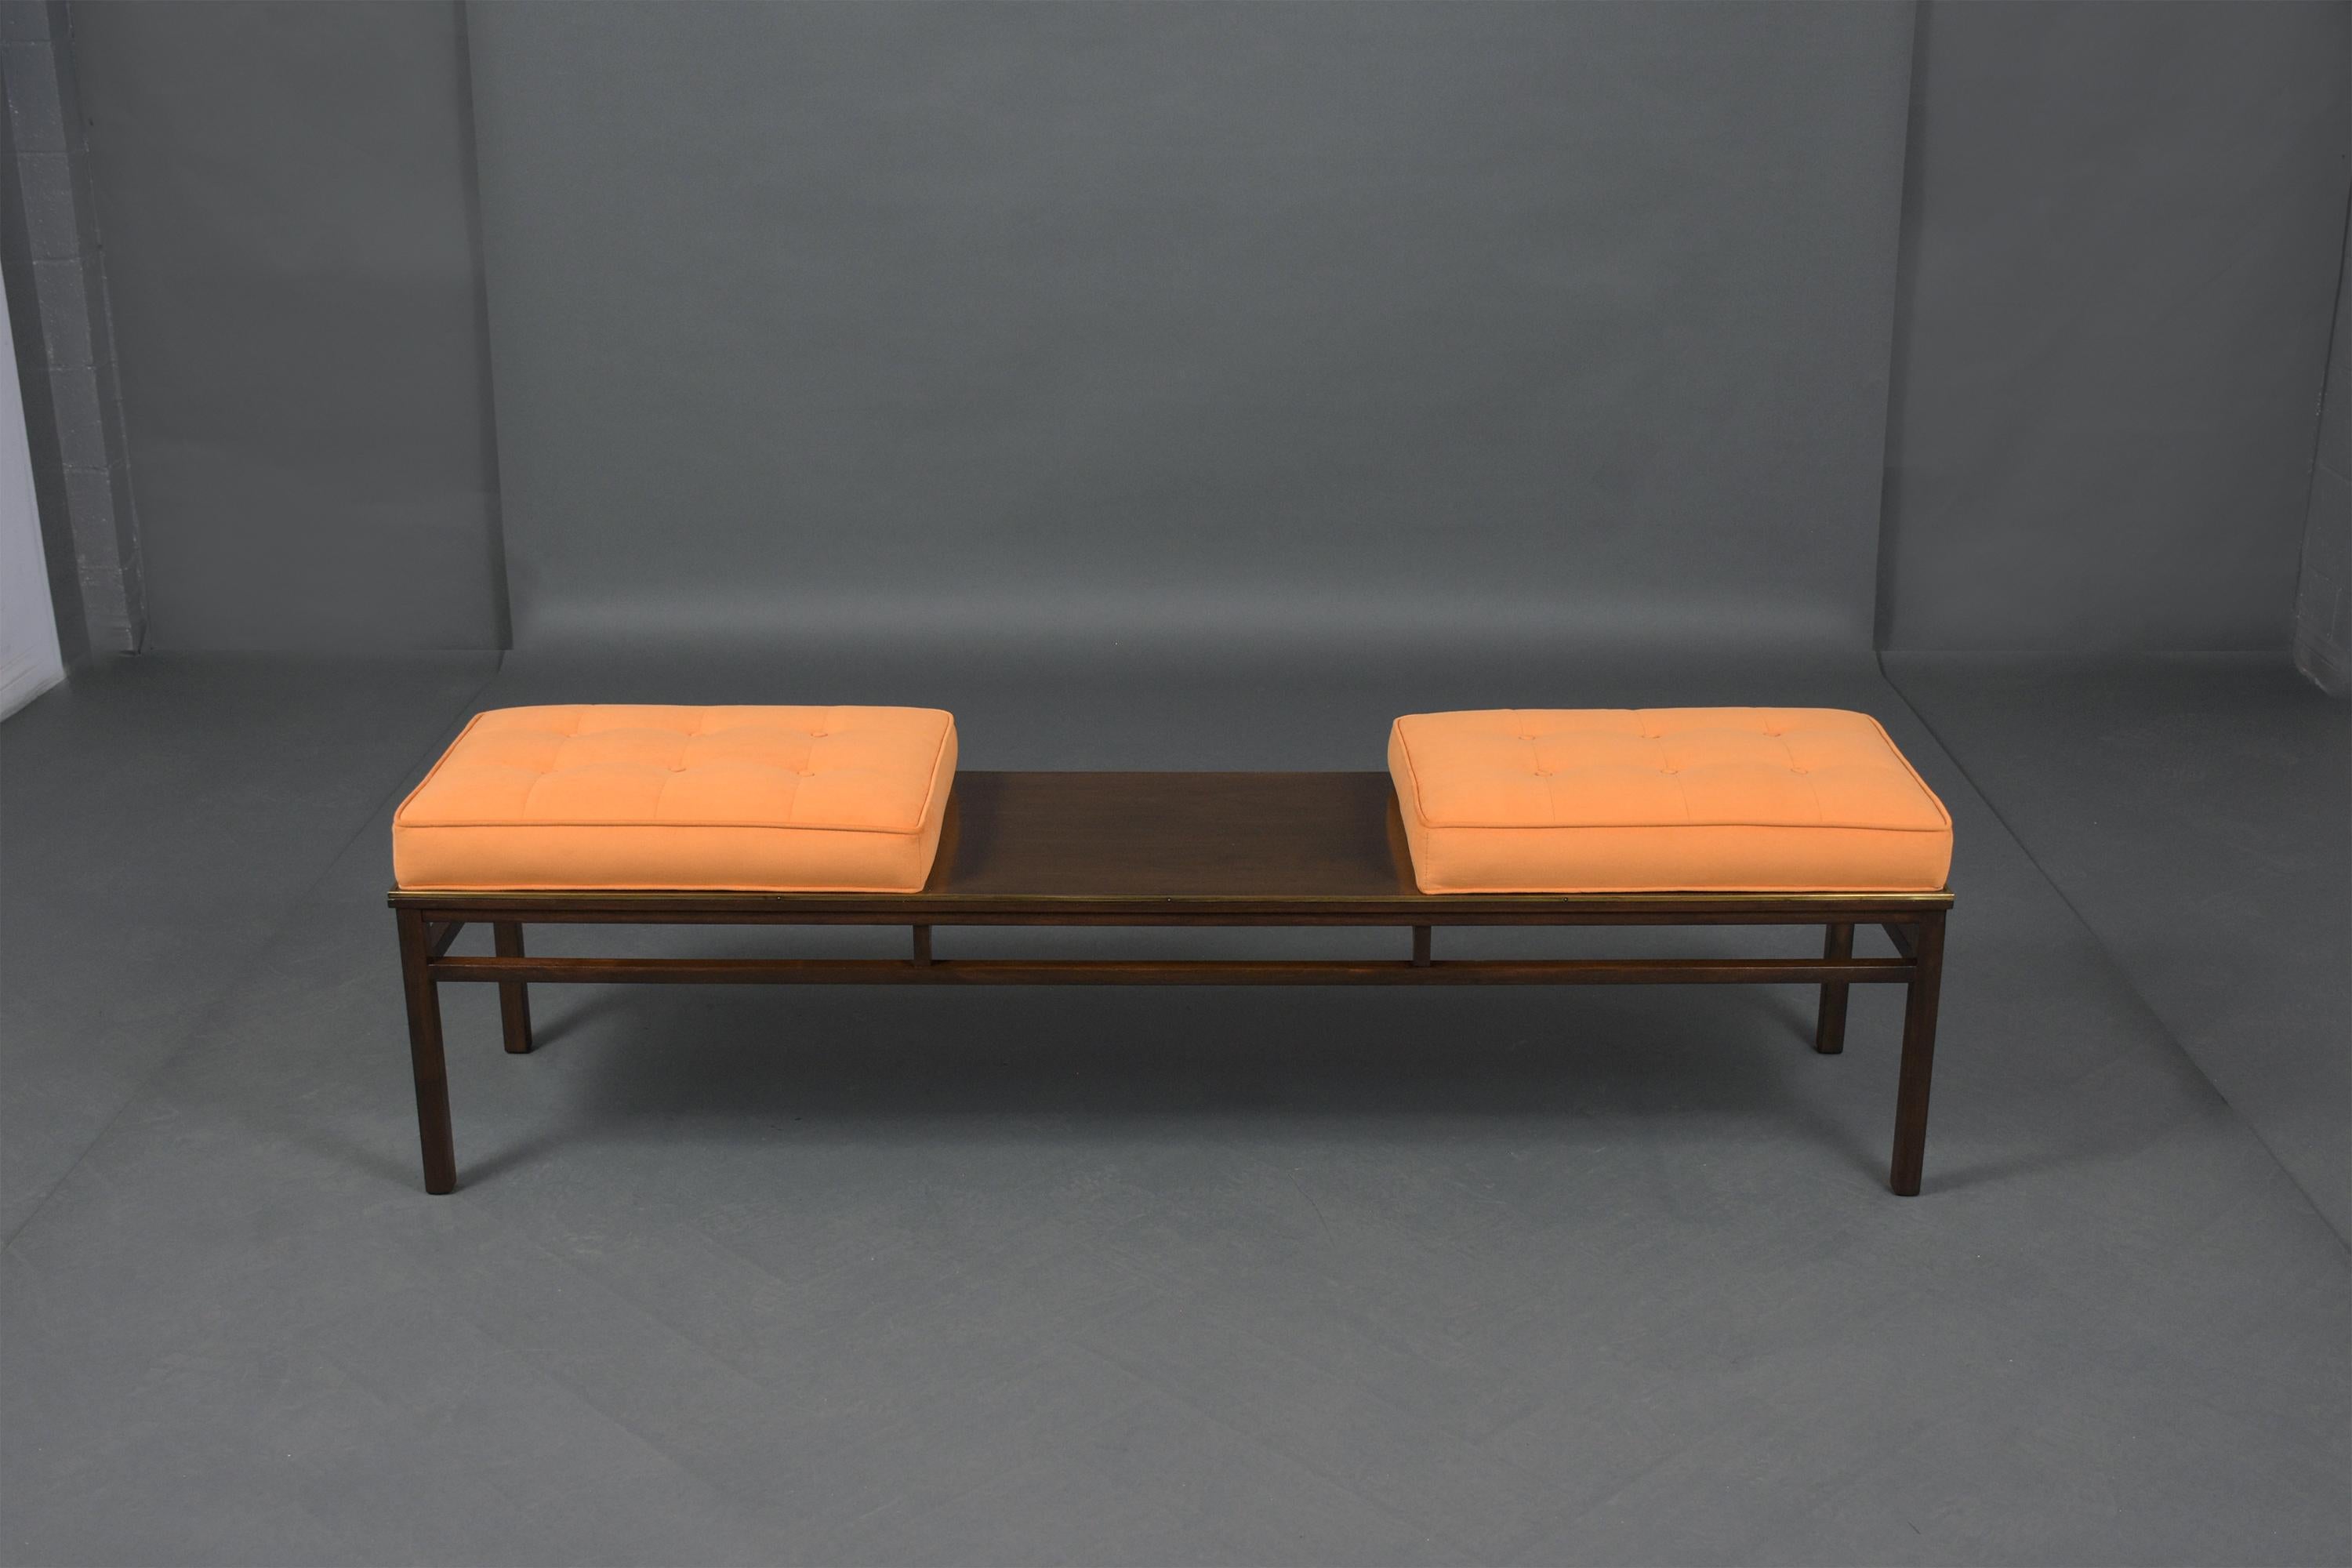 This extraordinary mid-century modern 1960s two double seated bench is in great condition and is beautifully crafted out of walnut wood and has been fully restored refinished and upholstered by our professional team of expert craftsmen. This